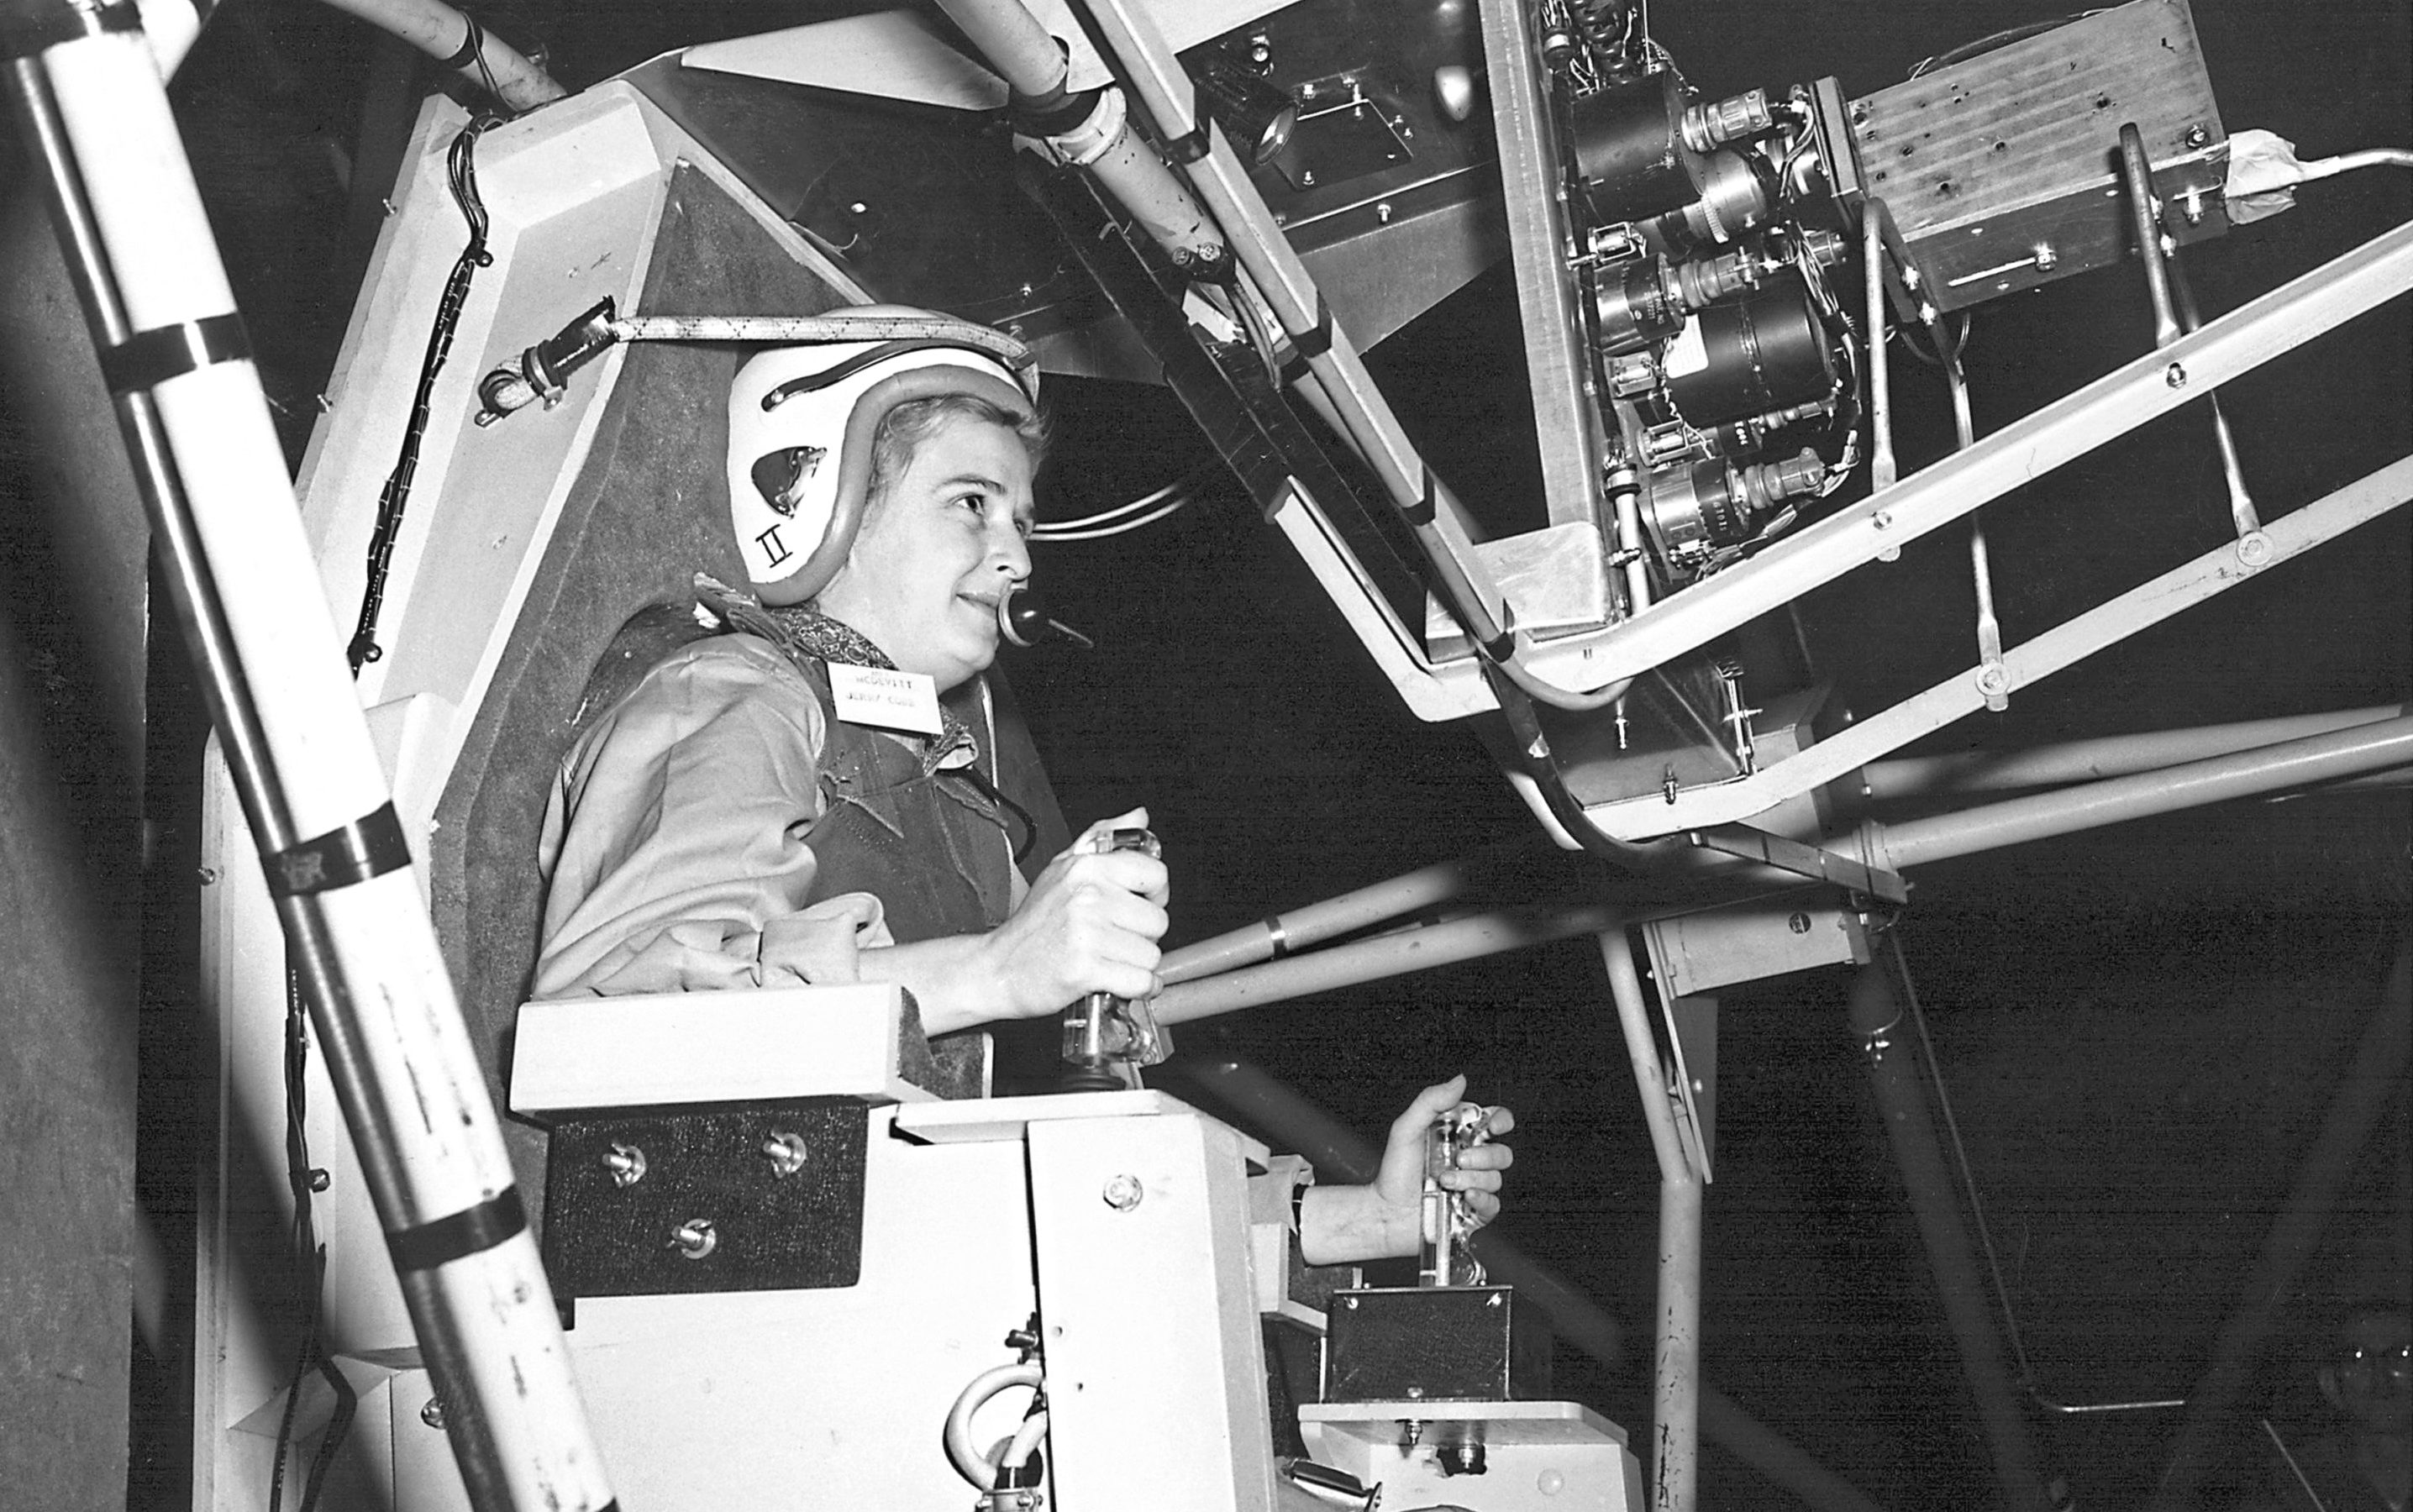 Astronaut trainee Jerrie Cobb learns to control spacecraft spin